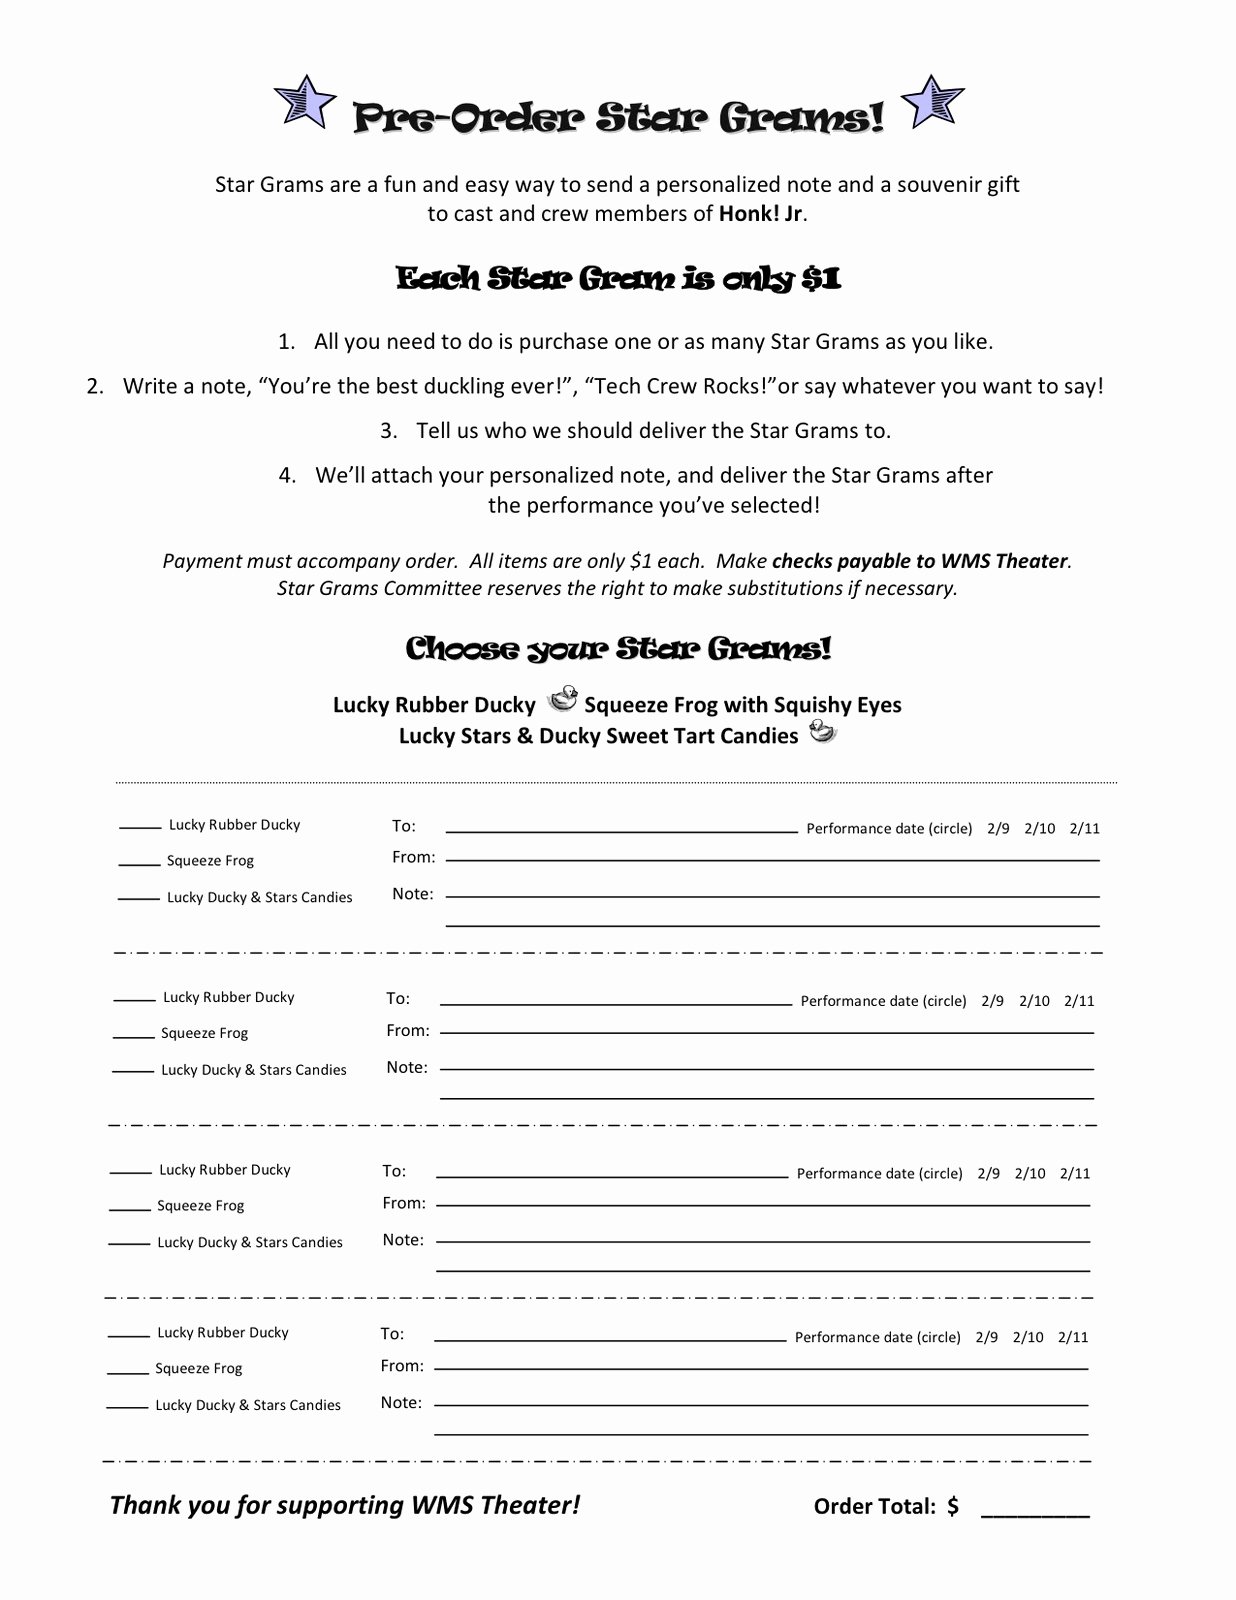 Pre order form Template Awesome Wyoming Middle School theater Stargrams Pre order form